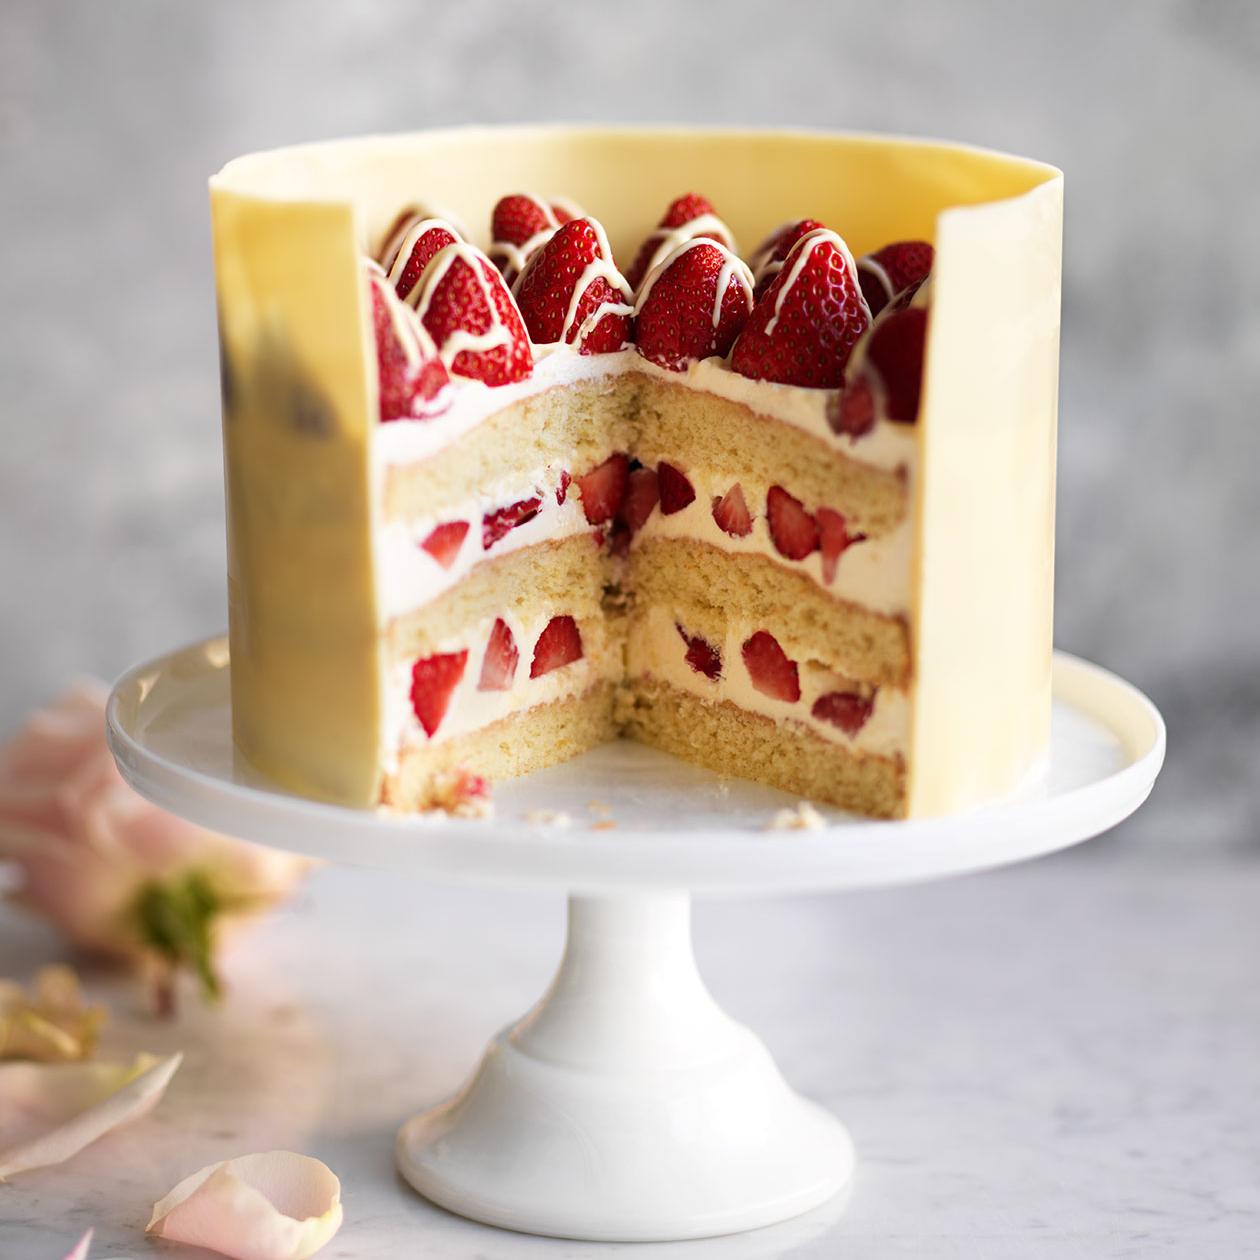 A Classic Sponge Cake (with Passion-fruit Filling) | Recipes | Delia Online